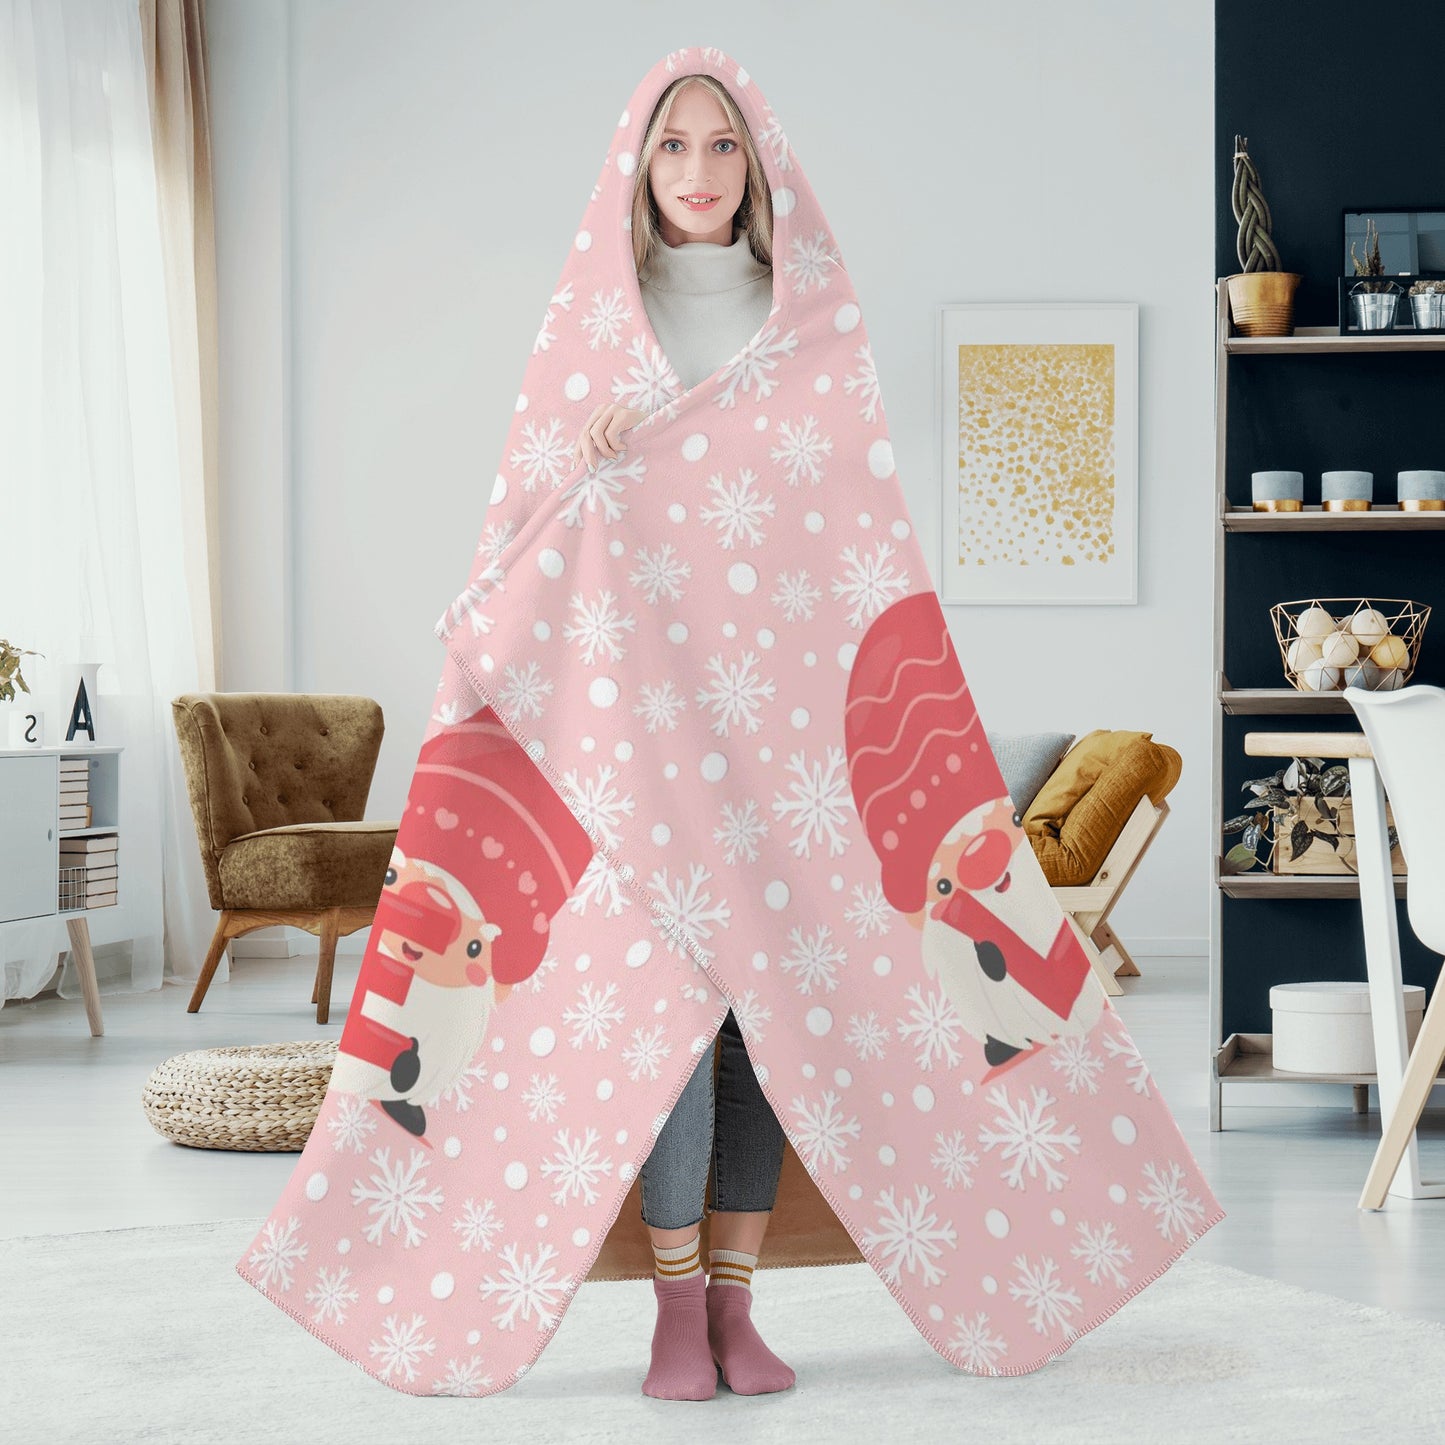 For the Love of Gnomes For Christmas Hooded Blanket